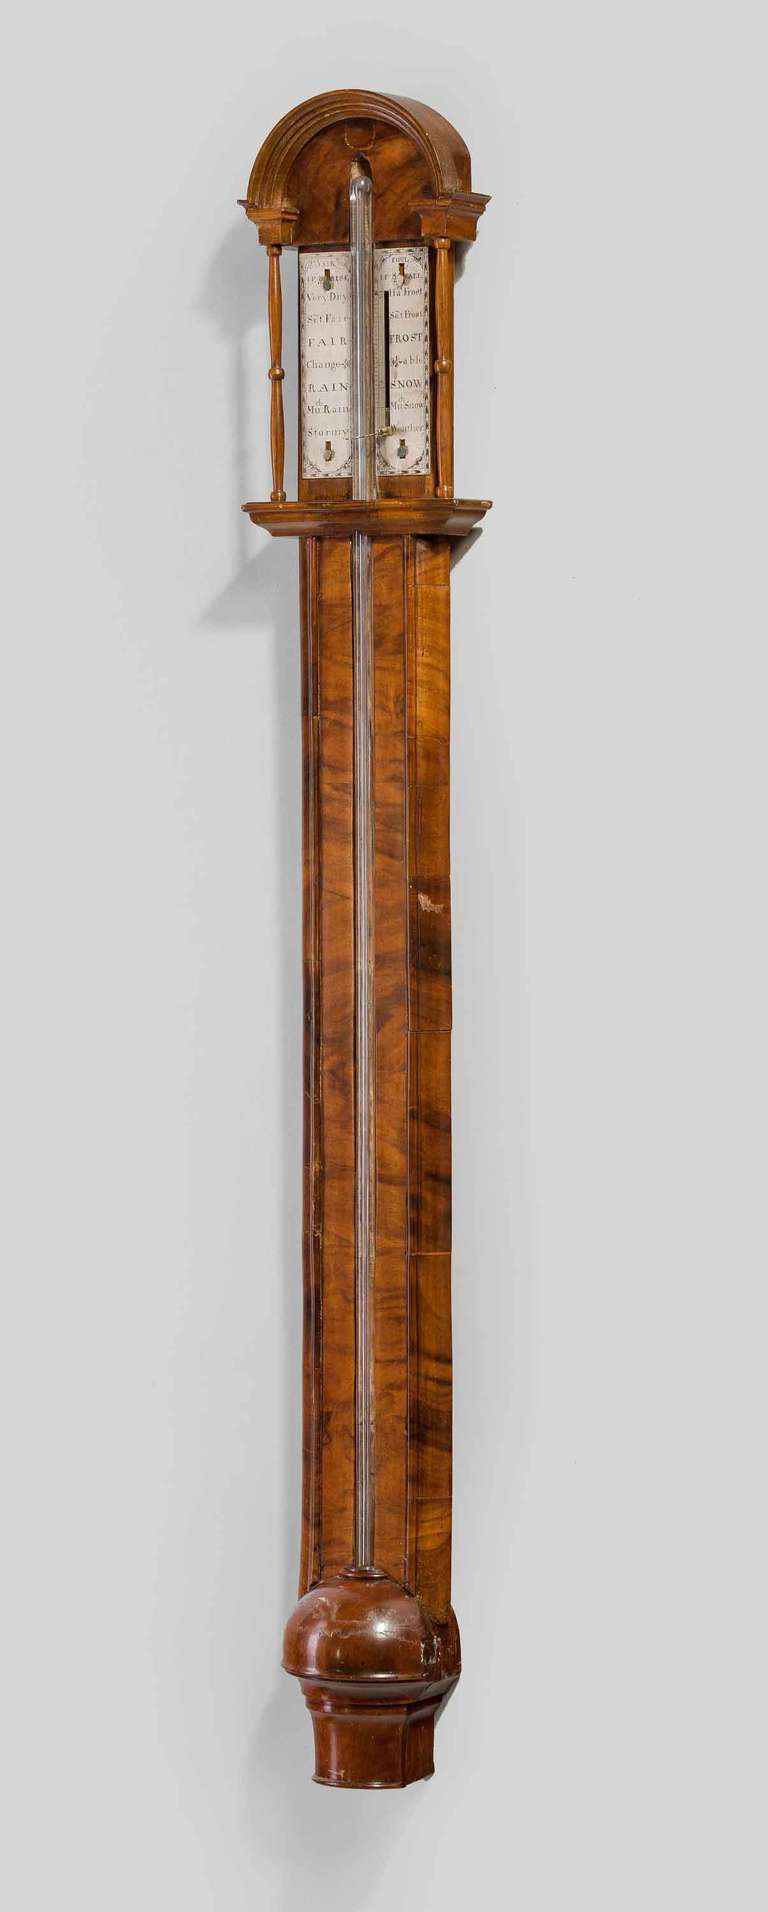 A very good early 18th century walnut barometer, walnut veneers applied to the oak carcase with an open cistern cover, hood pillars and curved pediment.

For a very similar example see Nicholas Goodison's book on English barometers page 201 plate